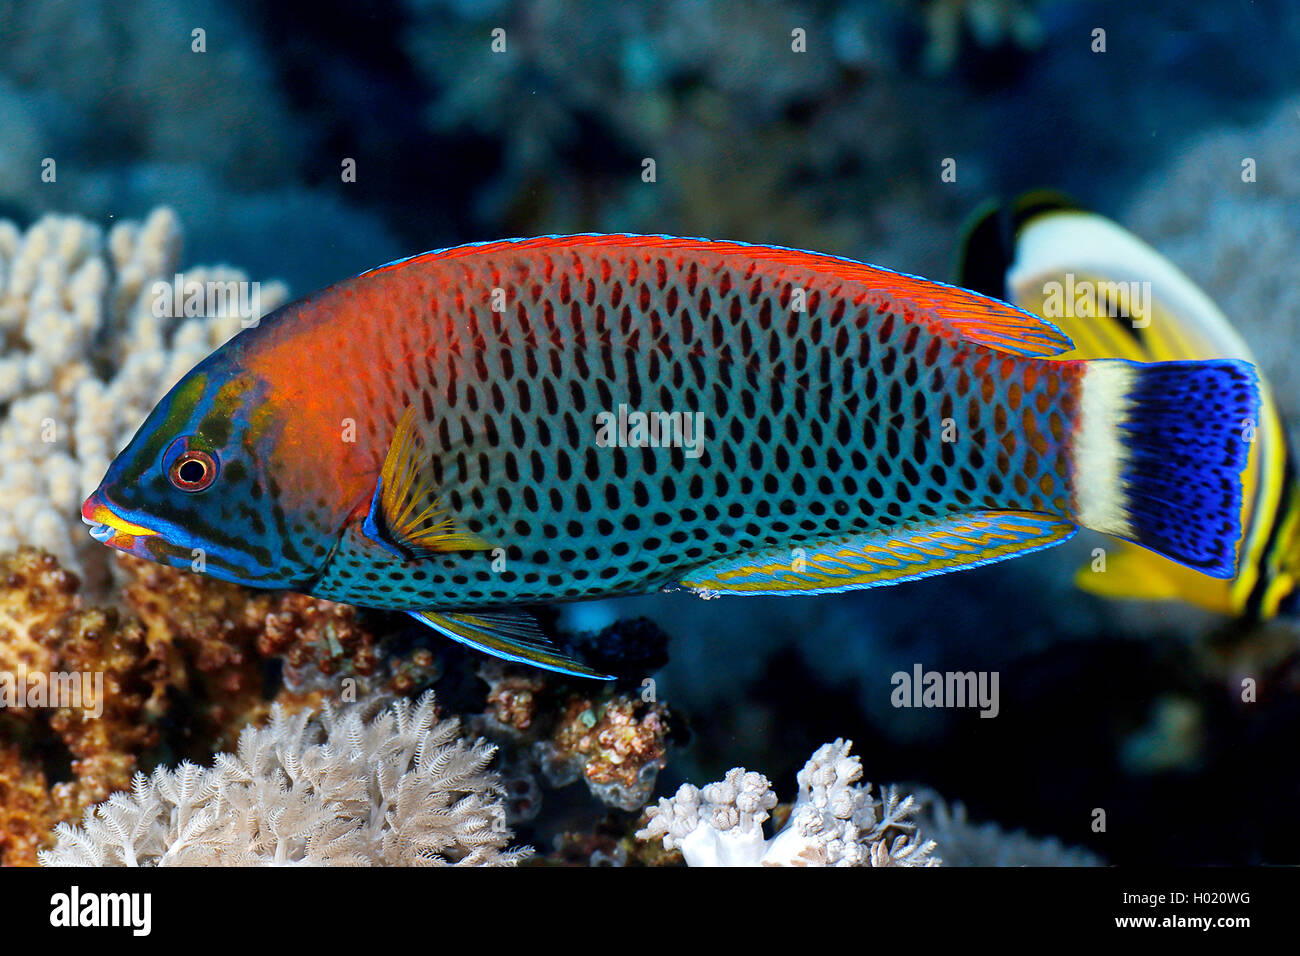 Chiseltooth wrasse (Pseudodax mollucanus), at coral reef, Egypt, Red Sea Stock Photo